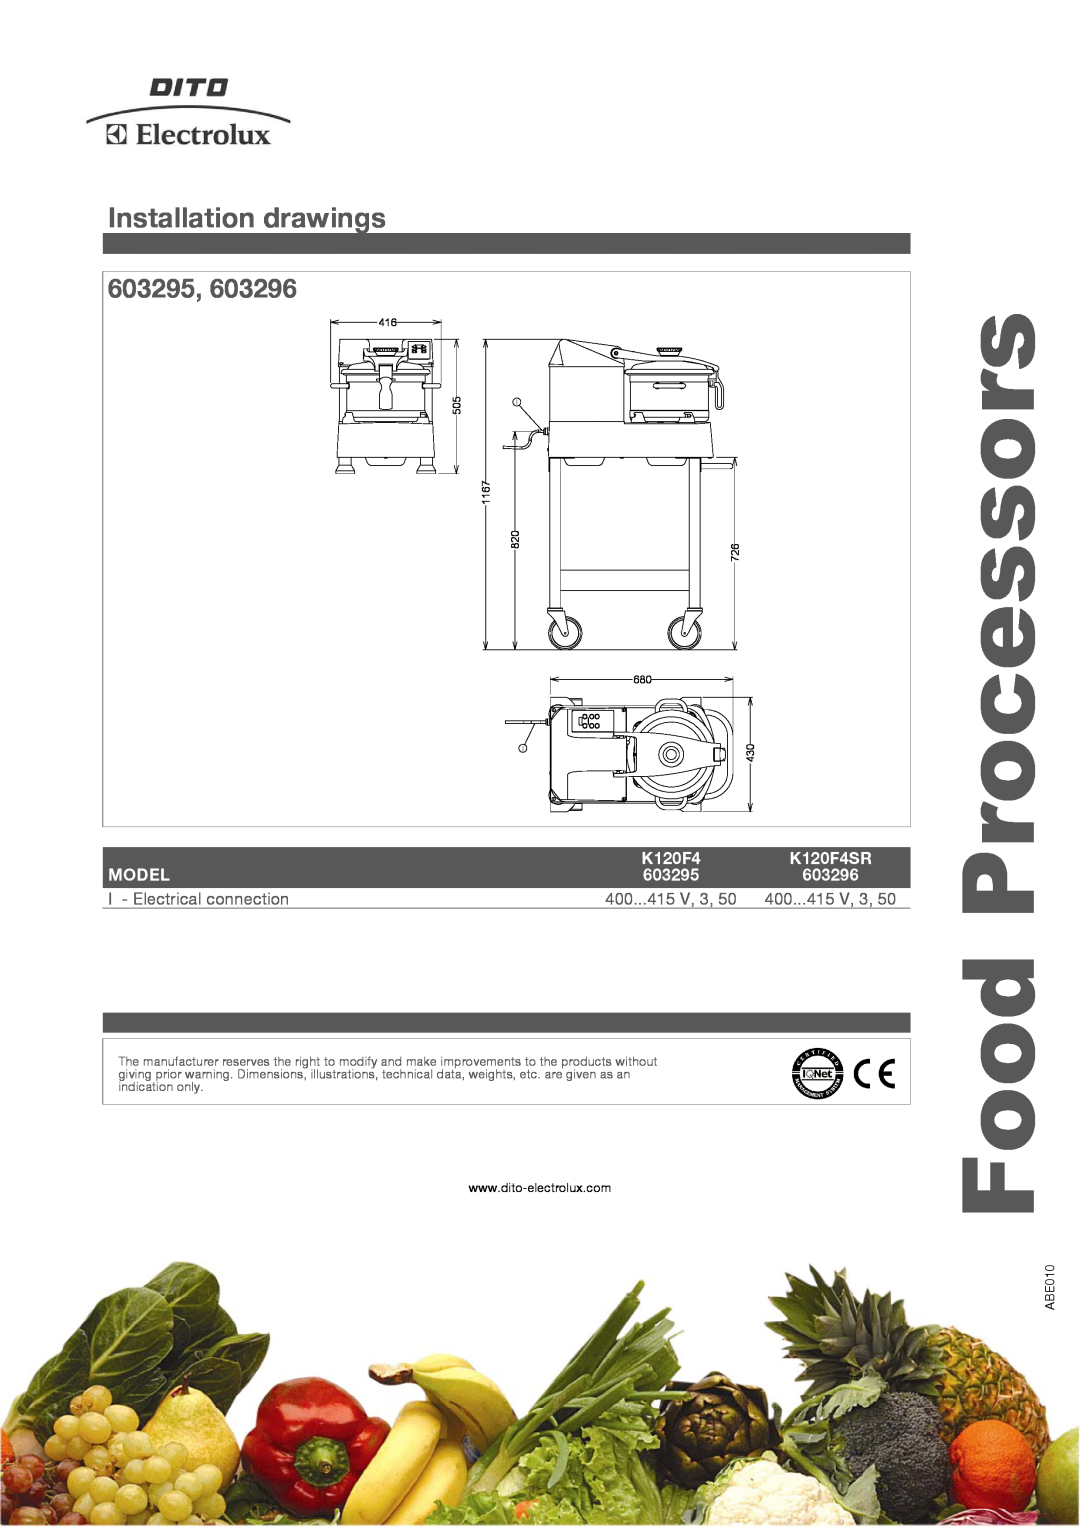 Electrolux K120F4SR Installation drawings, 603295, Food Processors, Model, 603296, I - Electrical connection, ABE010, 1167 